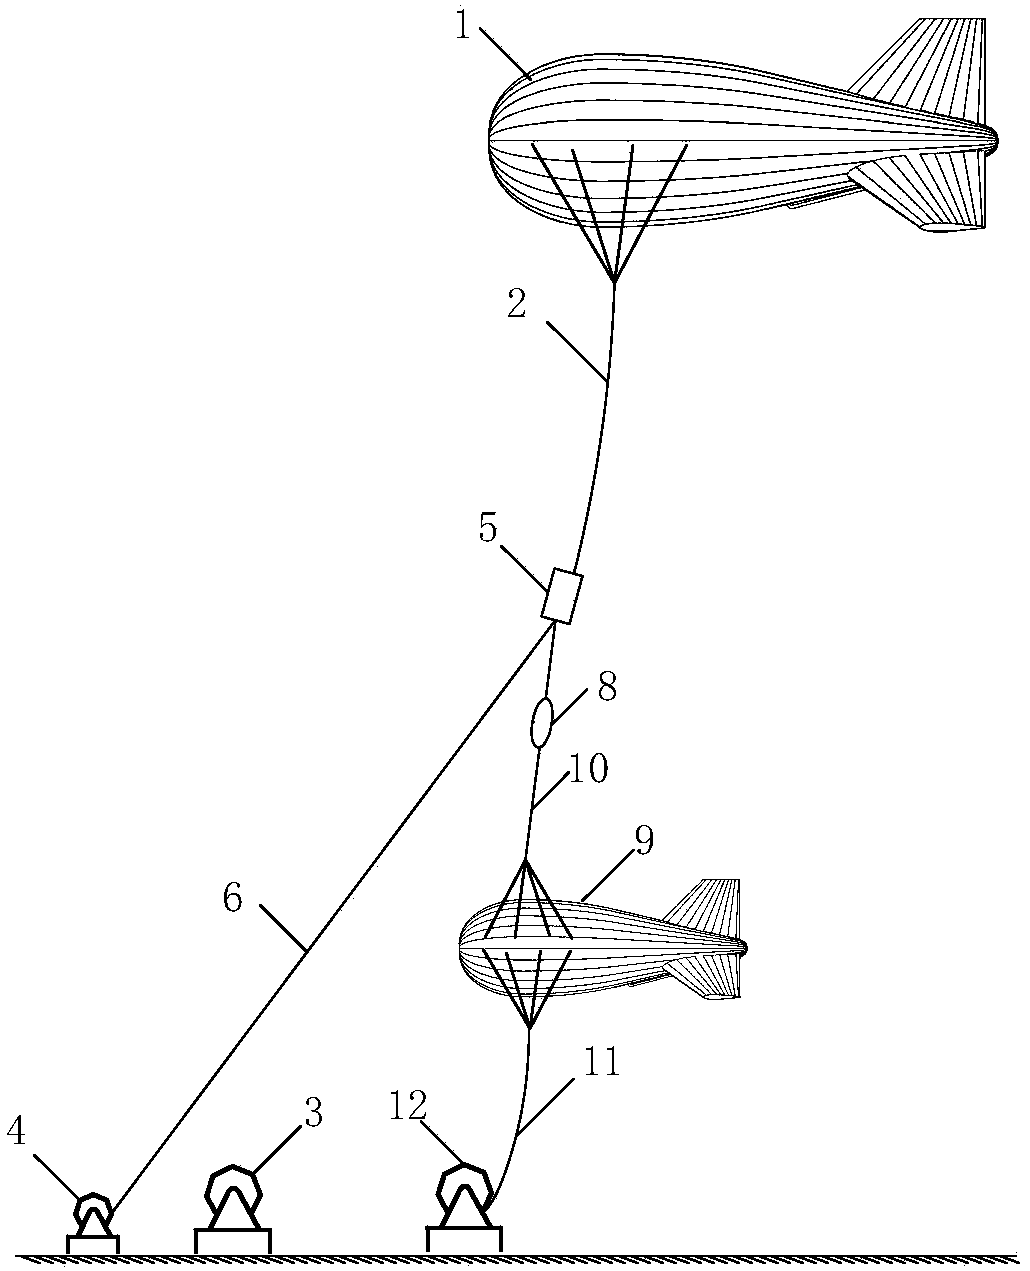 Series-type tethered aerostat and releasing method thereof